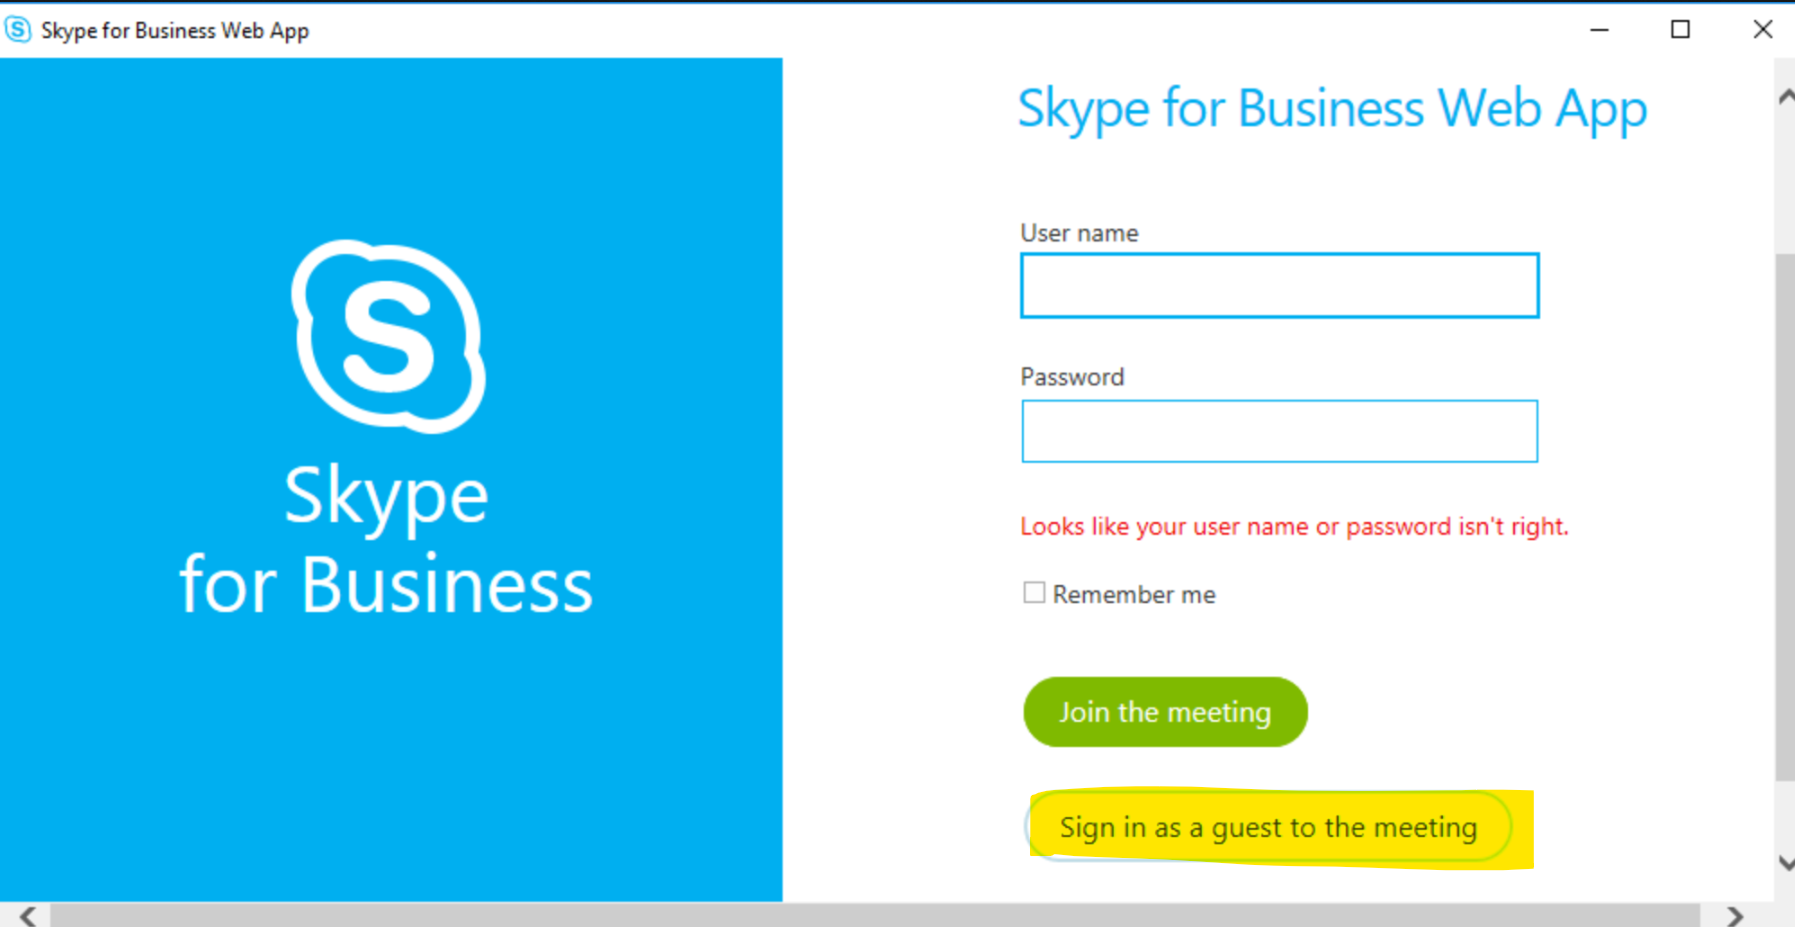 can join skype meeting as guest